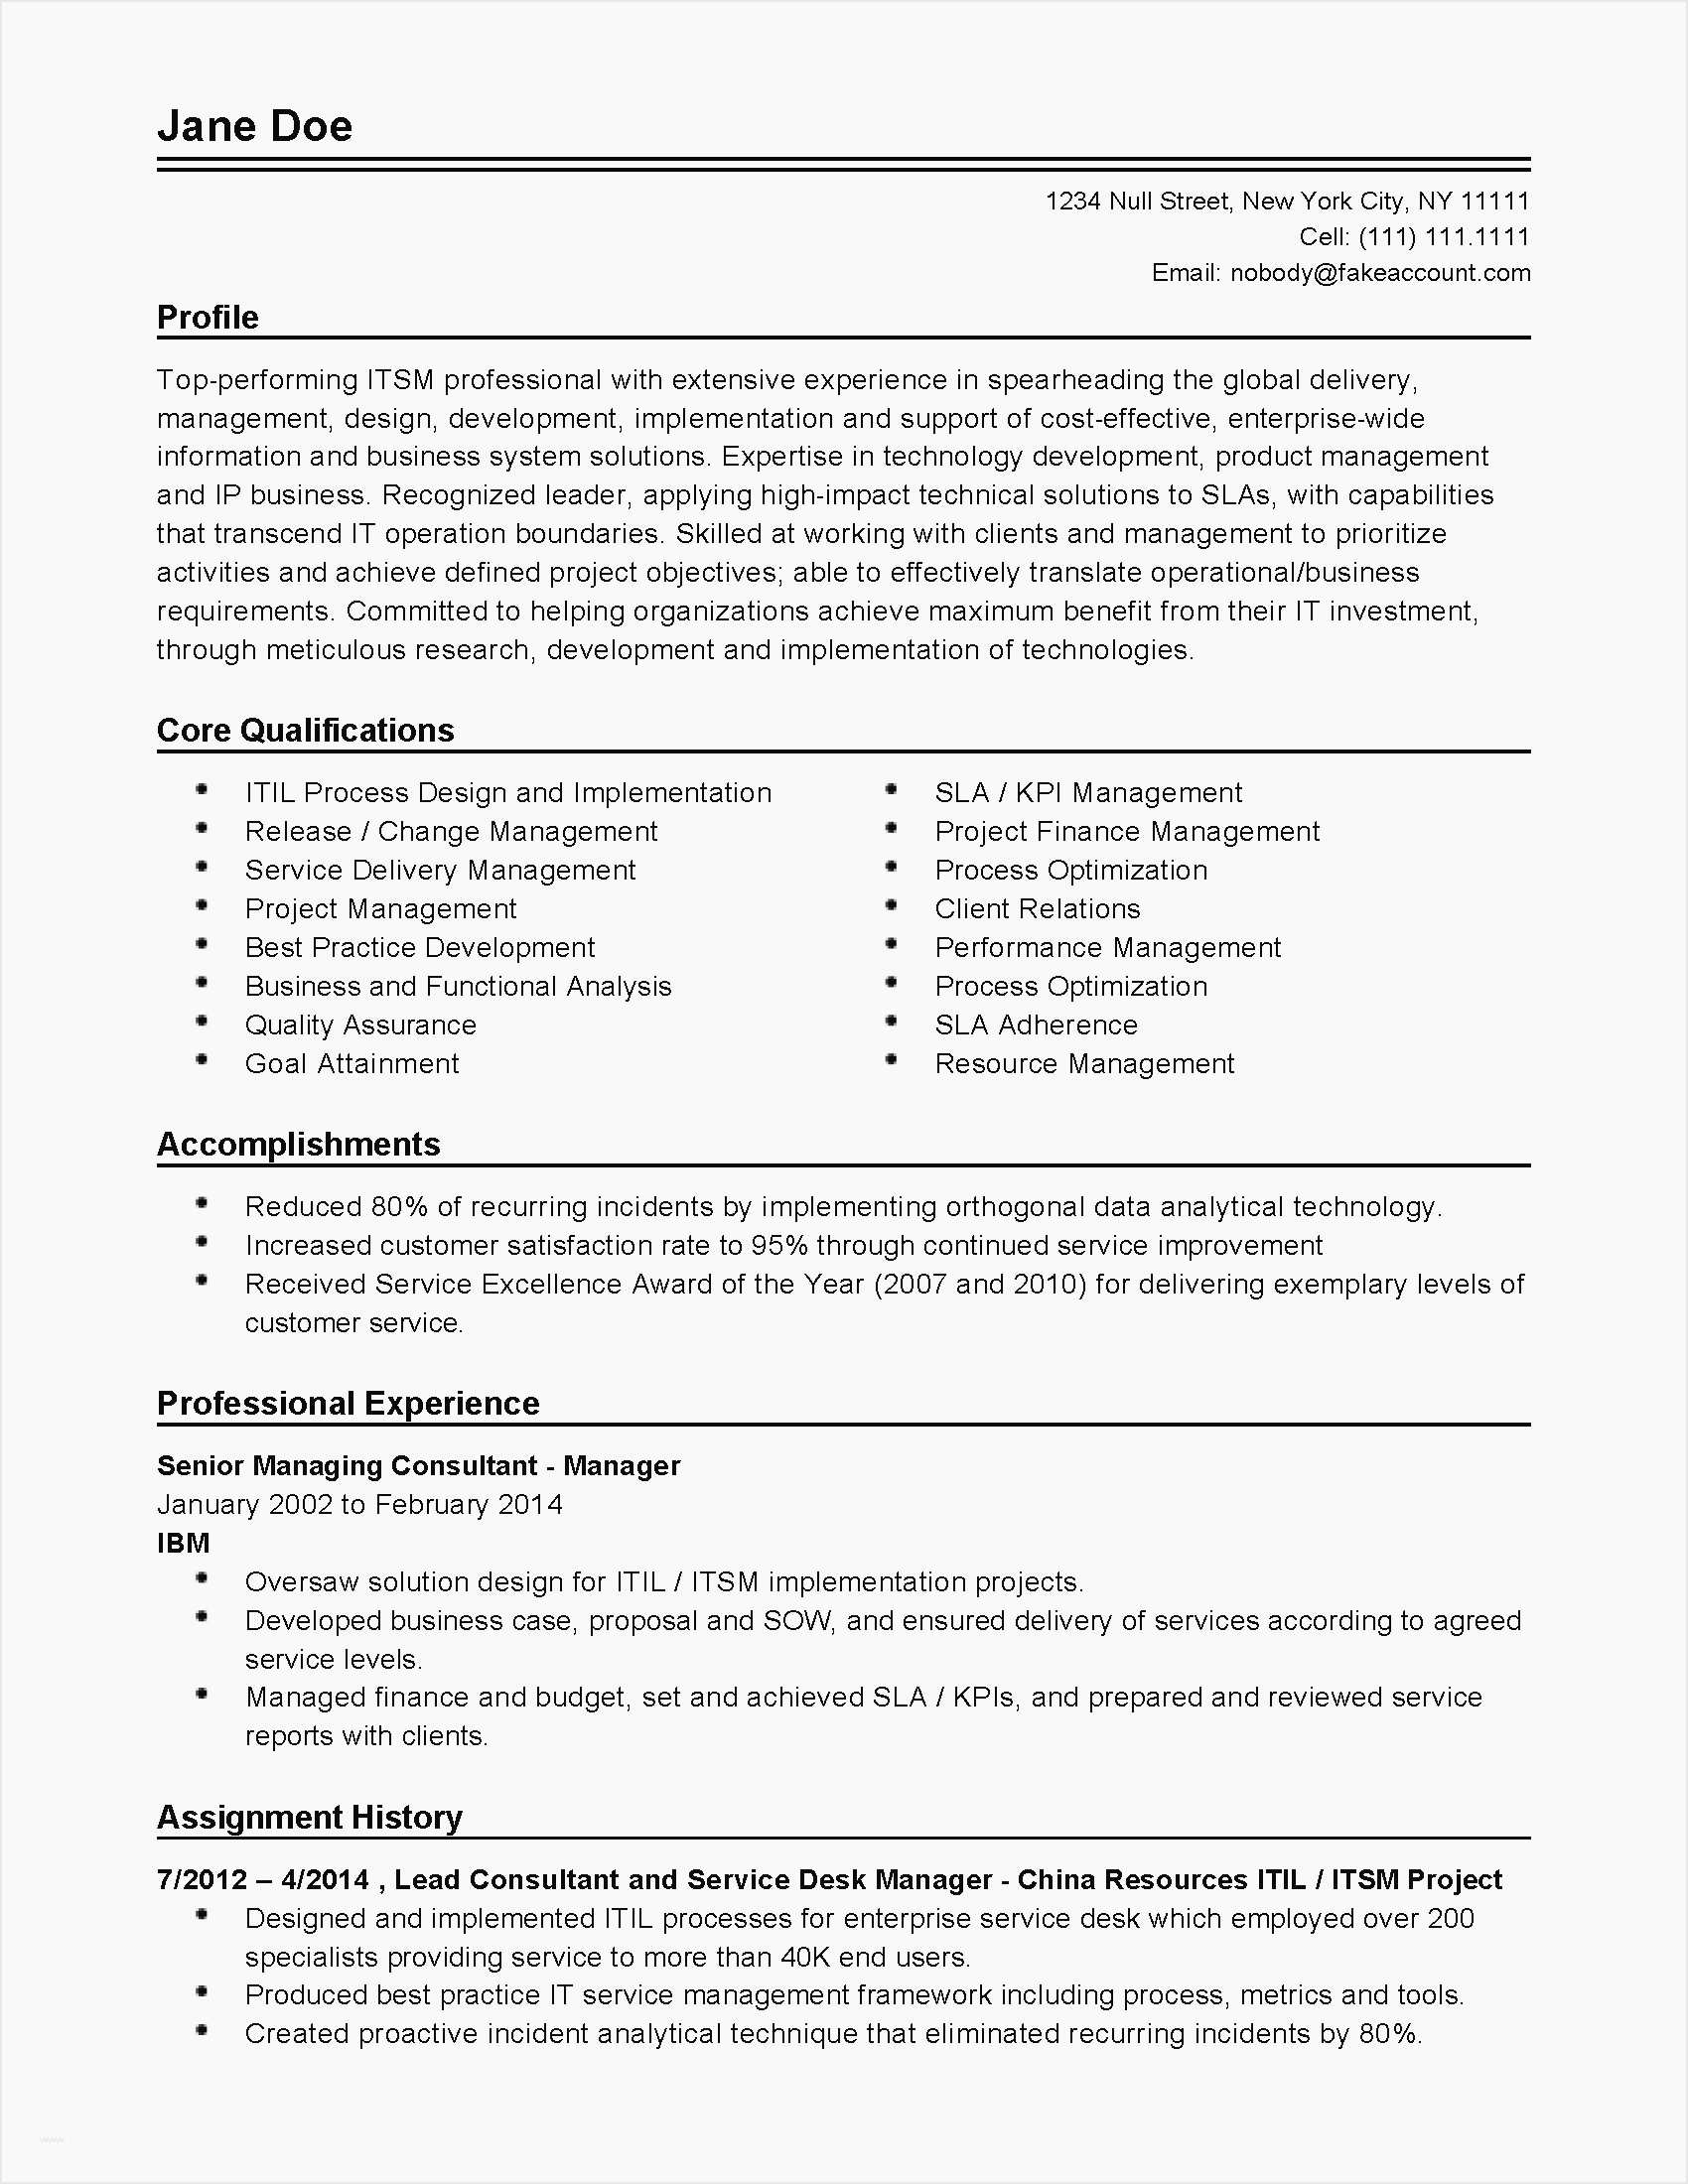 Cover Letter Template Pdf Free - Free Resume format Template Free Resume Cover Letter Template